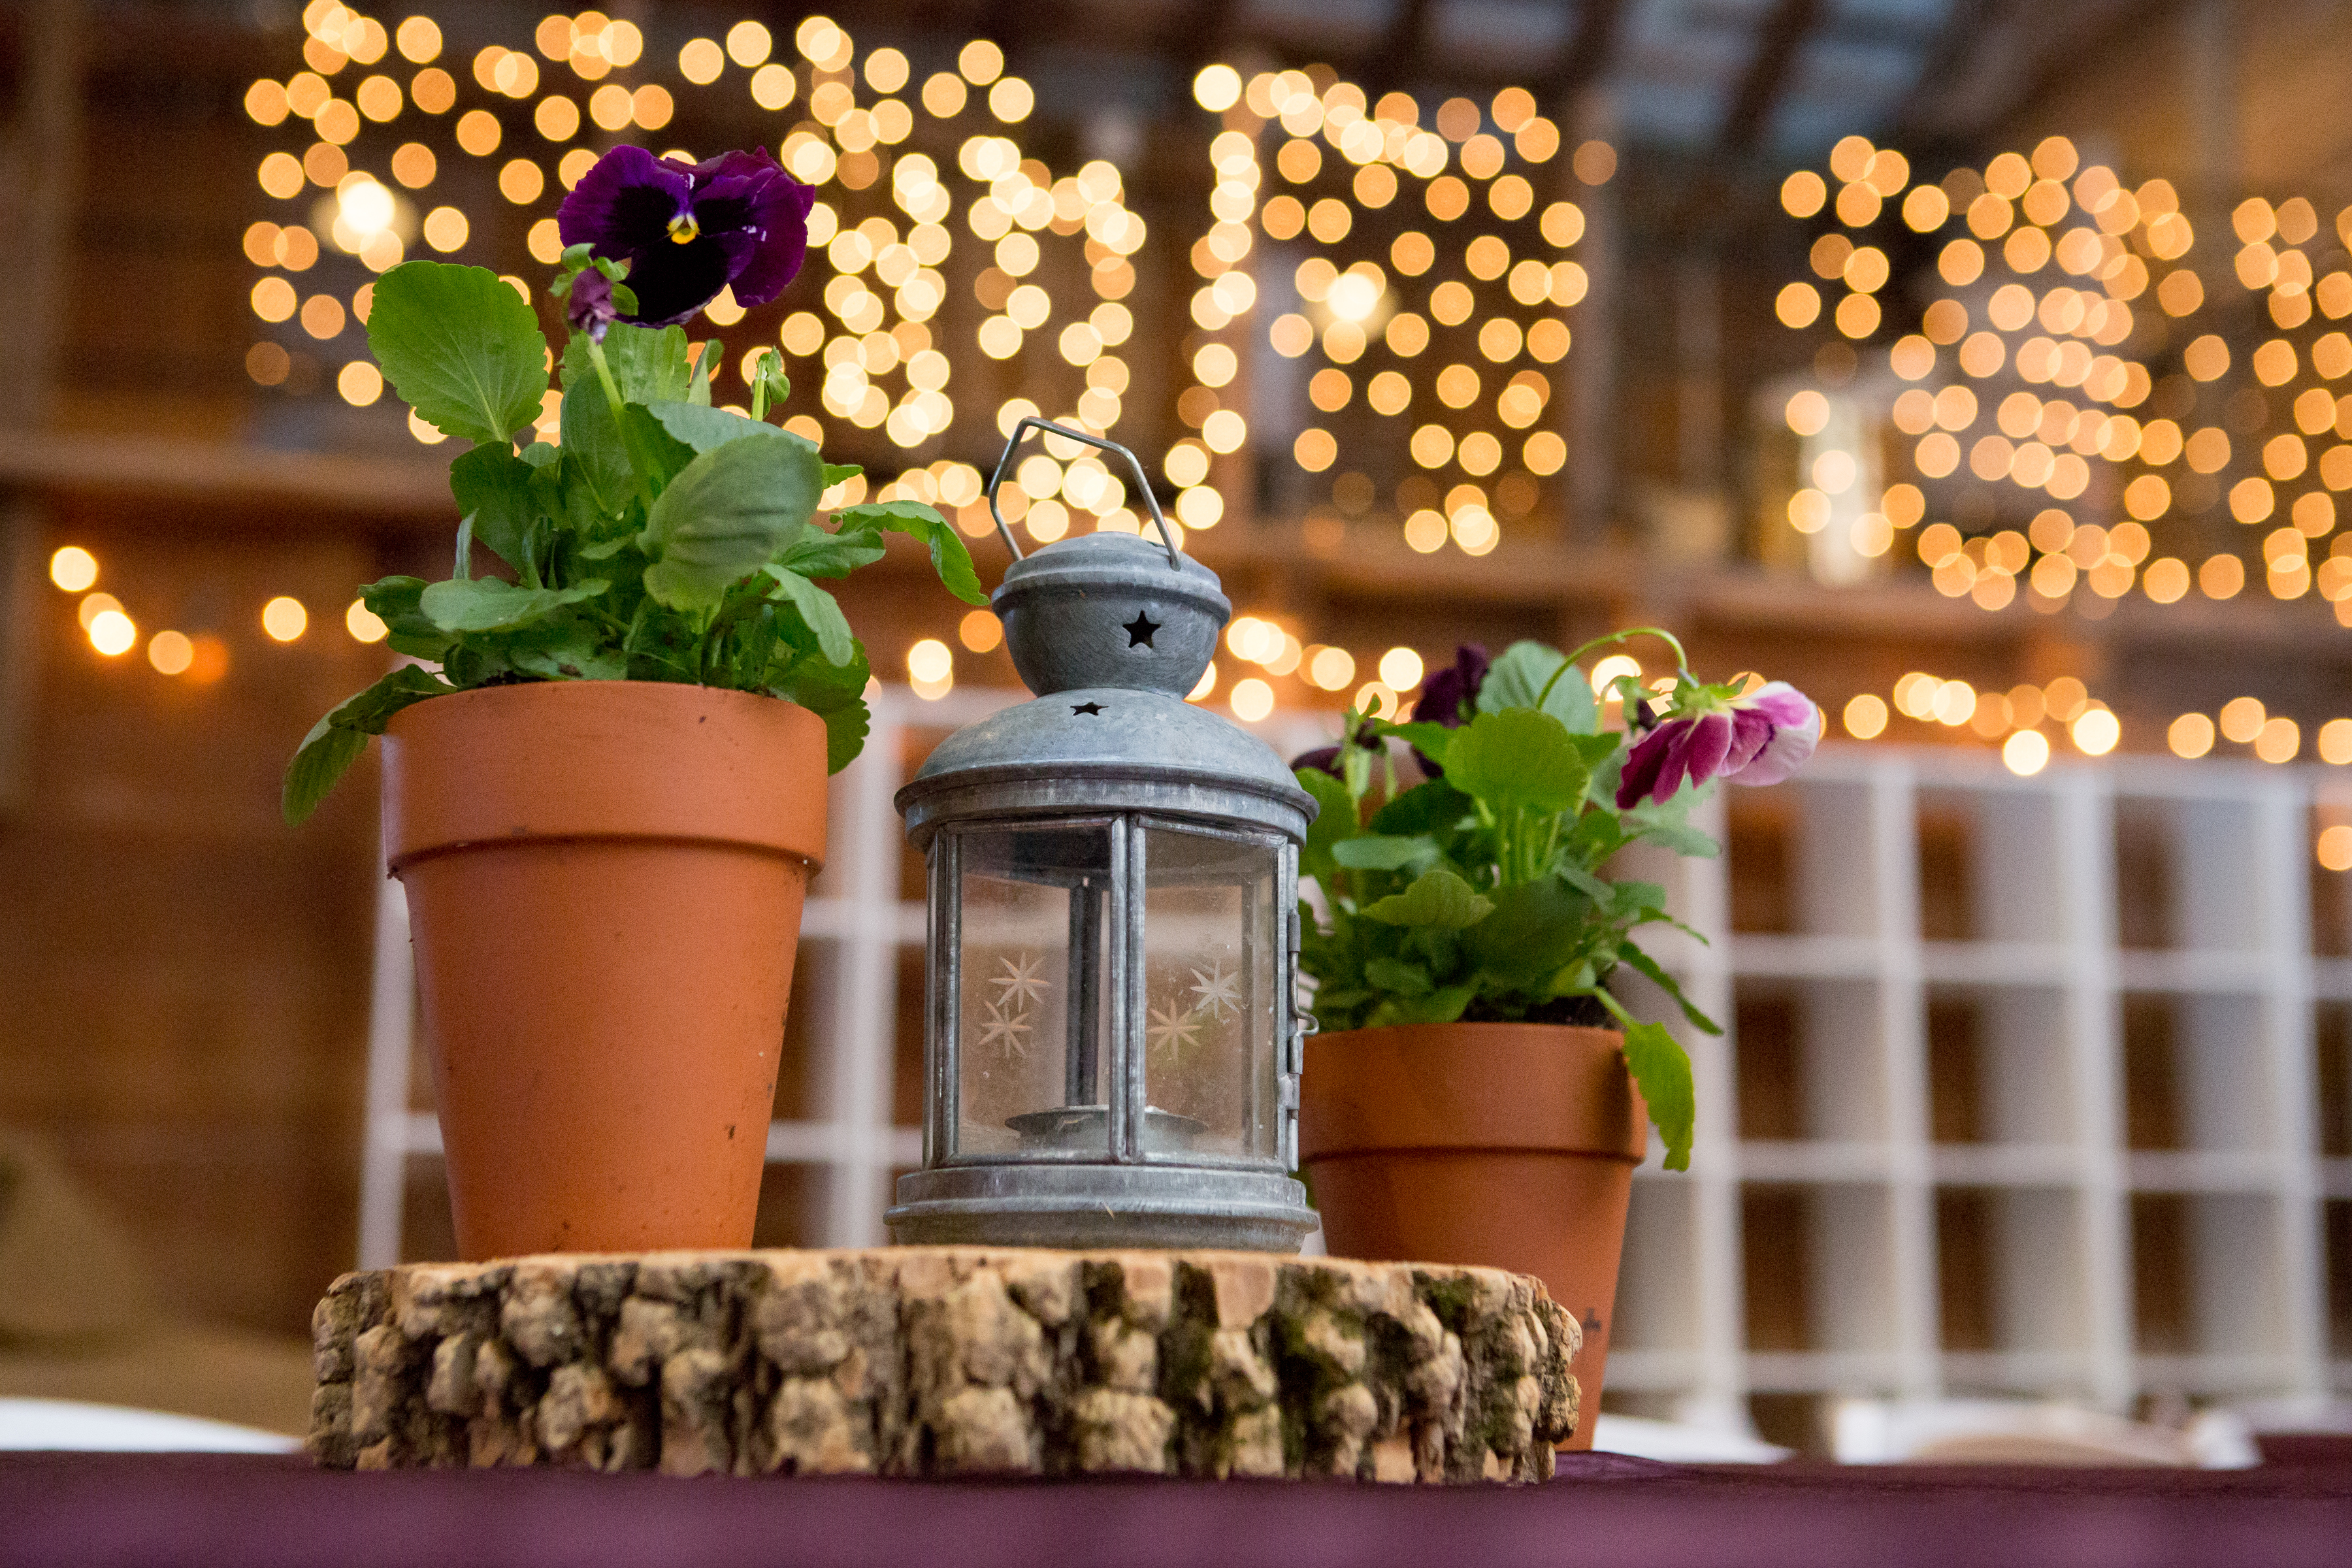 Potted floral centerpieces with lanterns and wood cuts at Maddie's Rustic Pink and purple Bat Mitzvah at Rocklands Farms in Poolsville, MD | Pop Color Events | Adding a Pop of Color to Bar & Bat Mitzvahs in DC, MD, and VA | Photo by Jessica Latos Photography